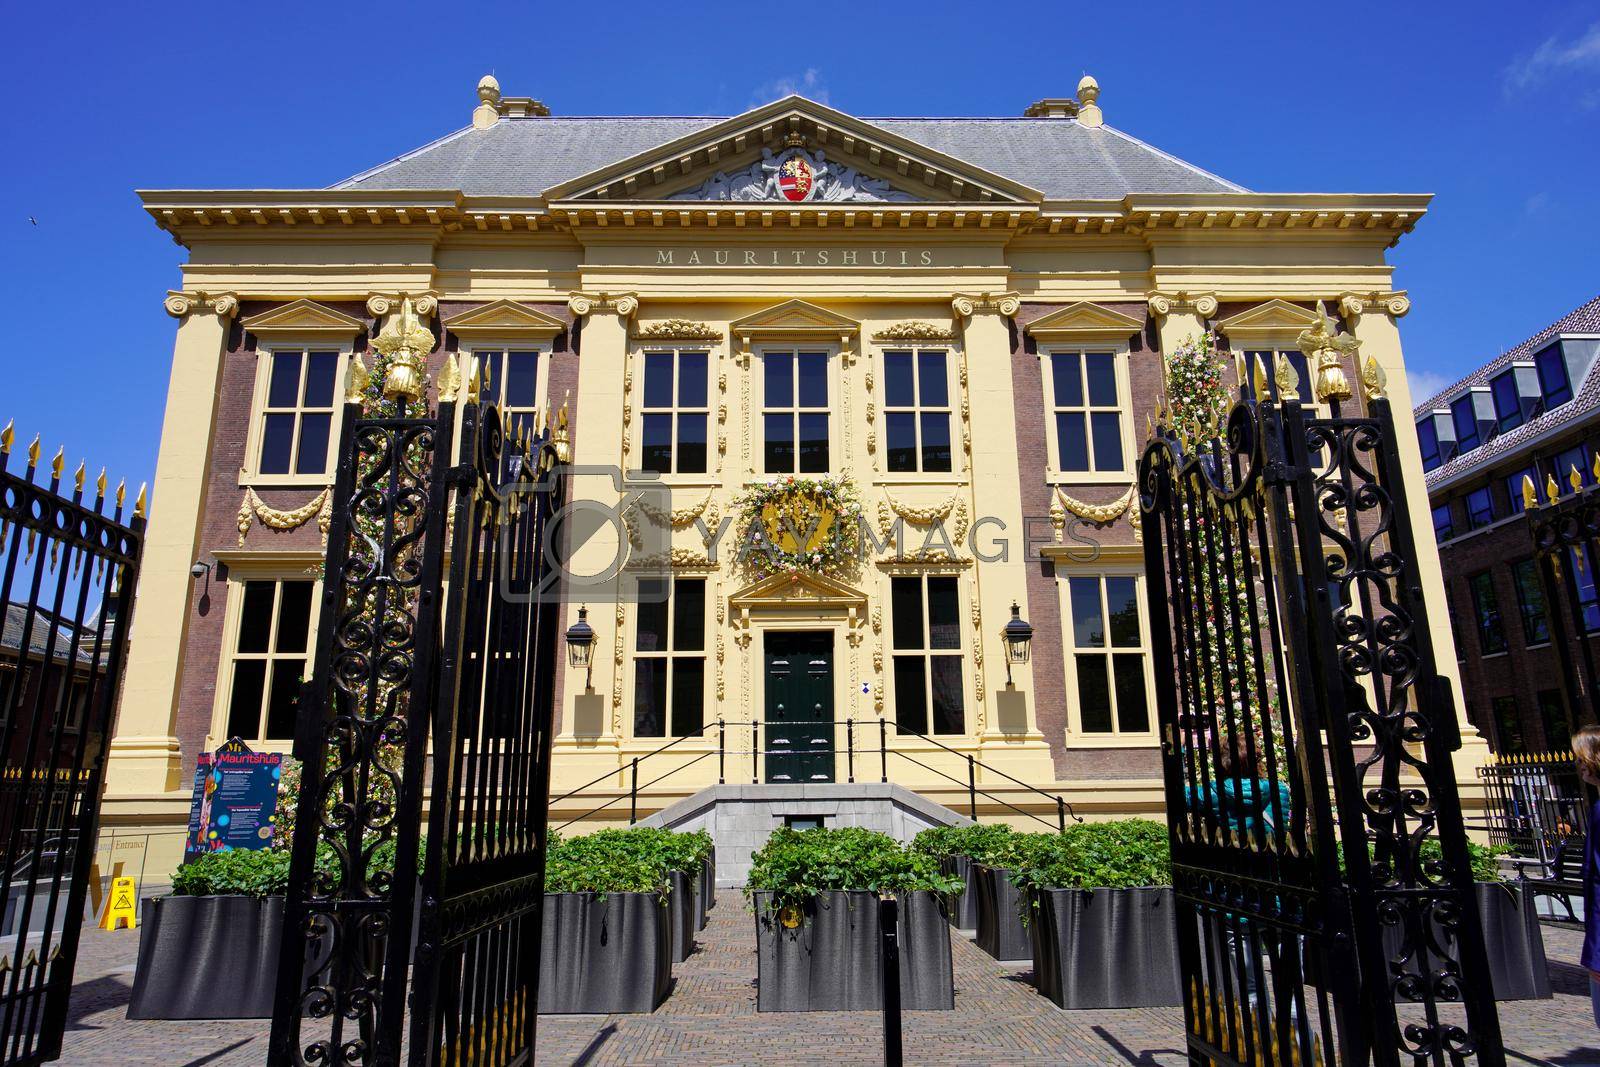 THE HAGUE, NETHERLANDS - JUNE 9, 2022: Facade of The Mauritshuis an art museum in The Hague, Netherlands